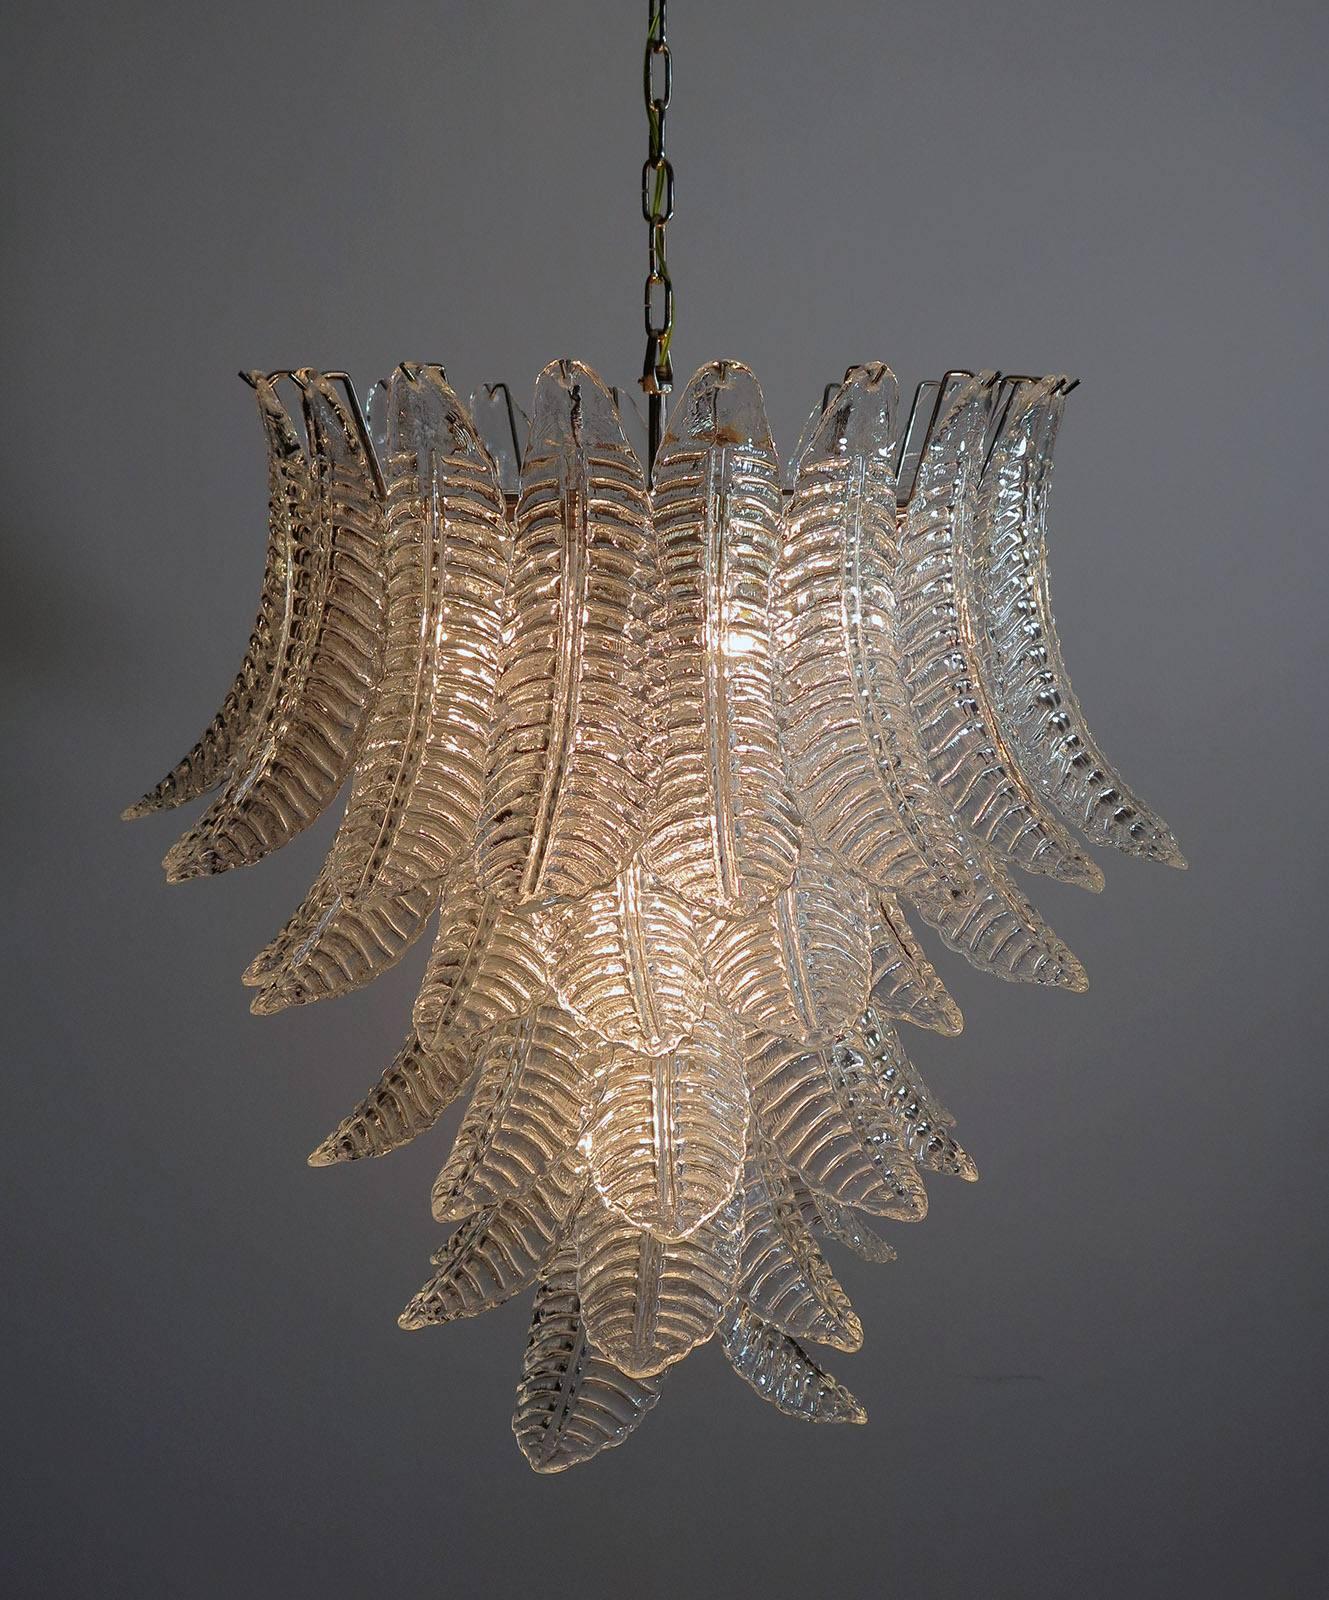 Pair of beautiful and huge Italian Murano chandeliers each composed of 52 splendid transparent glasses that give a very elegant look. The glasses of this chandelier are real works of art; the weight of this chandelier is 45 kg.

Dimensions: 61